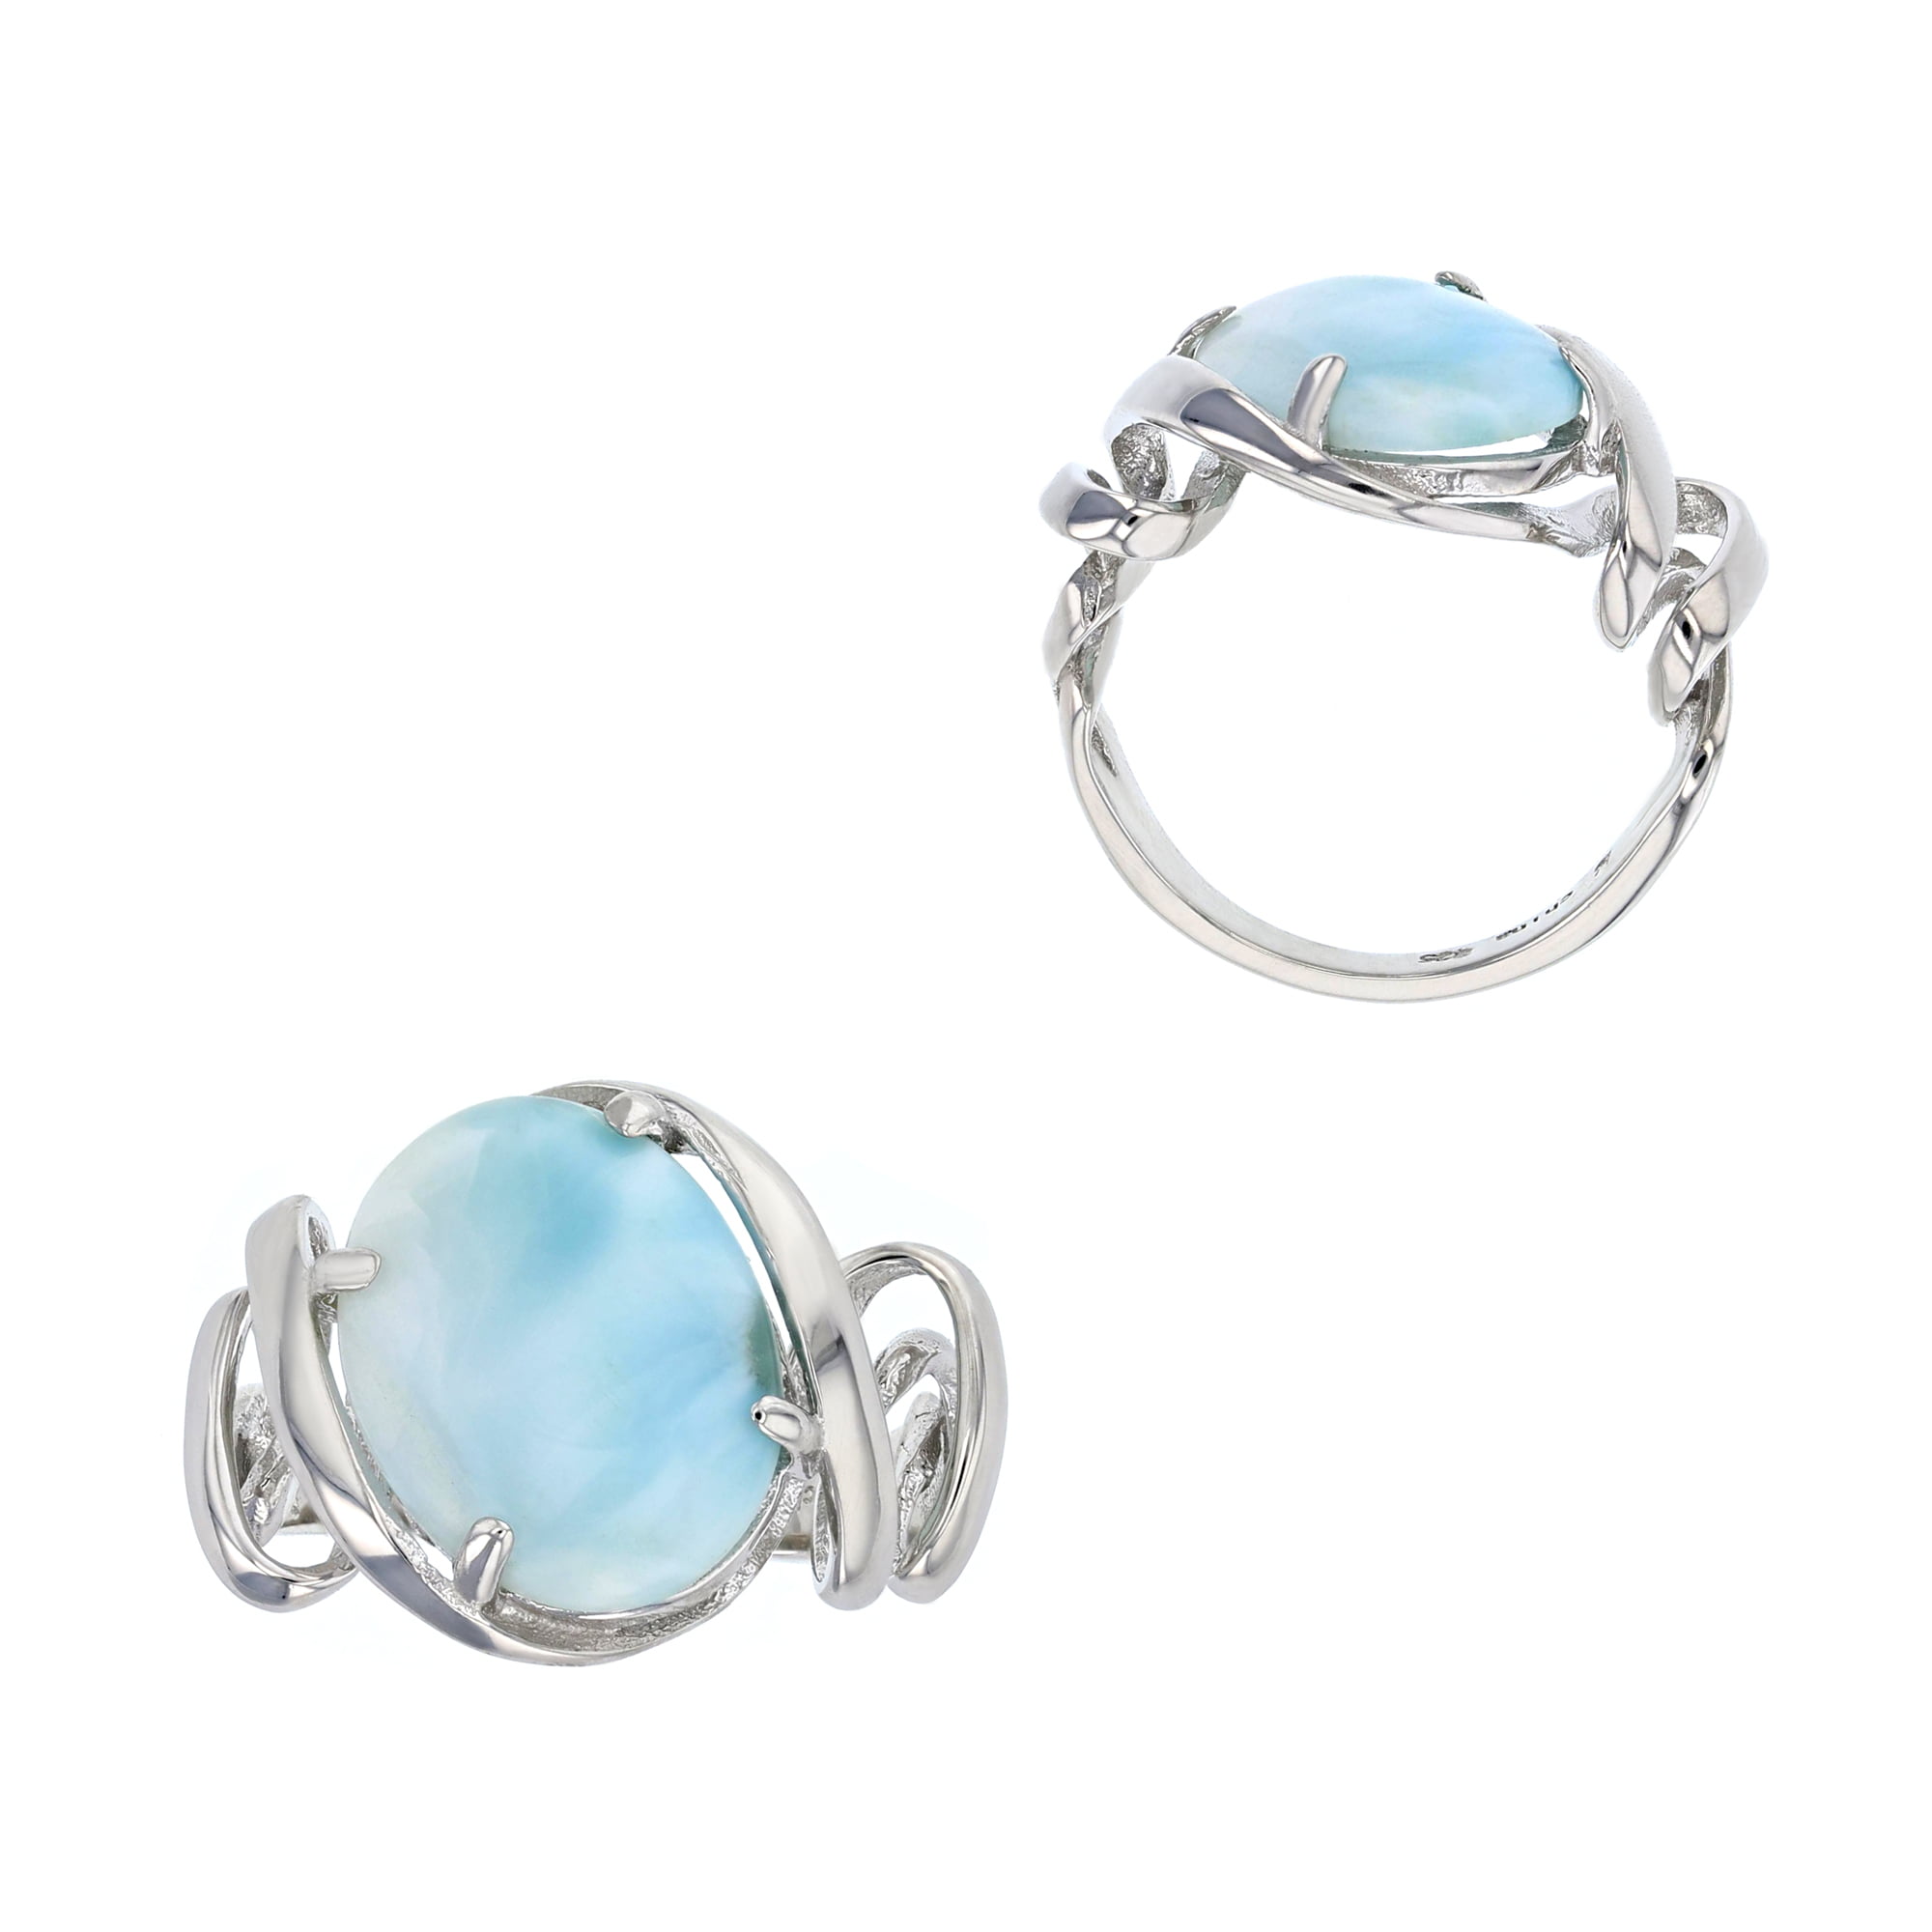 Details about   Platinum Plated 925 Sterling Silver Rings w/ Natural Aquamarines